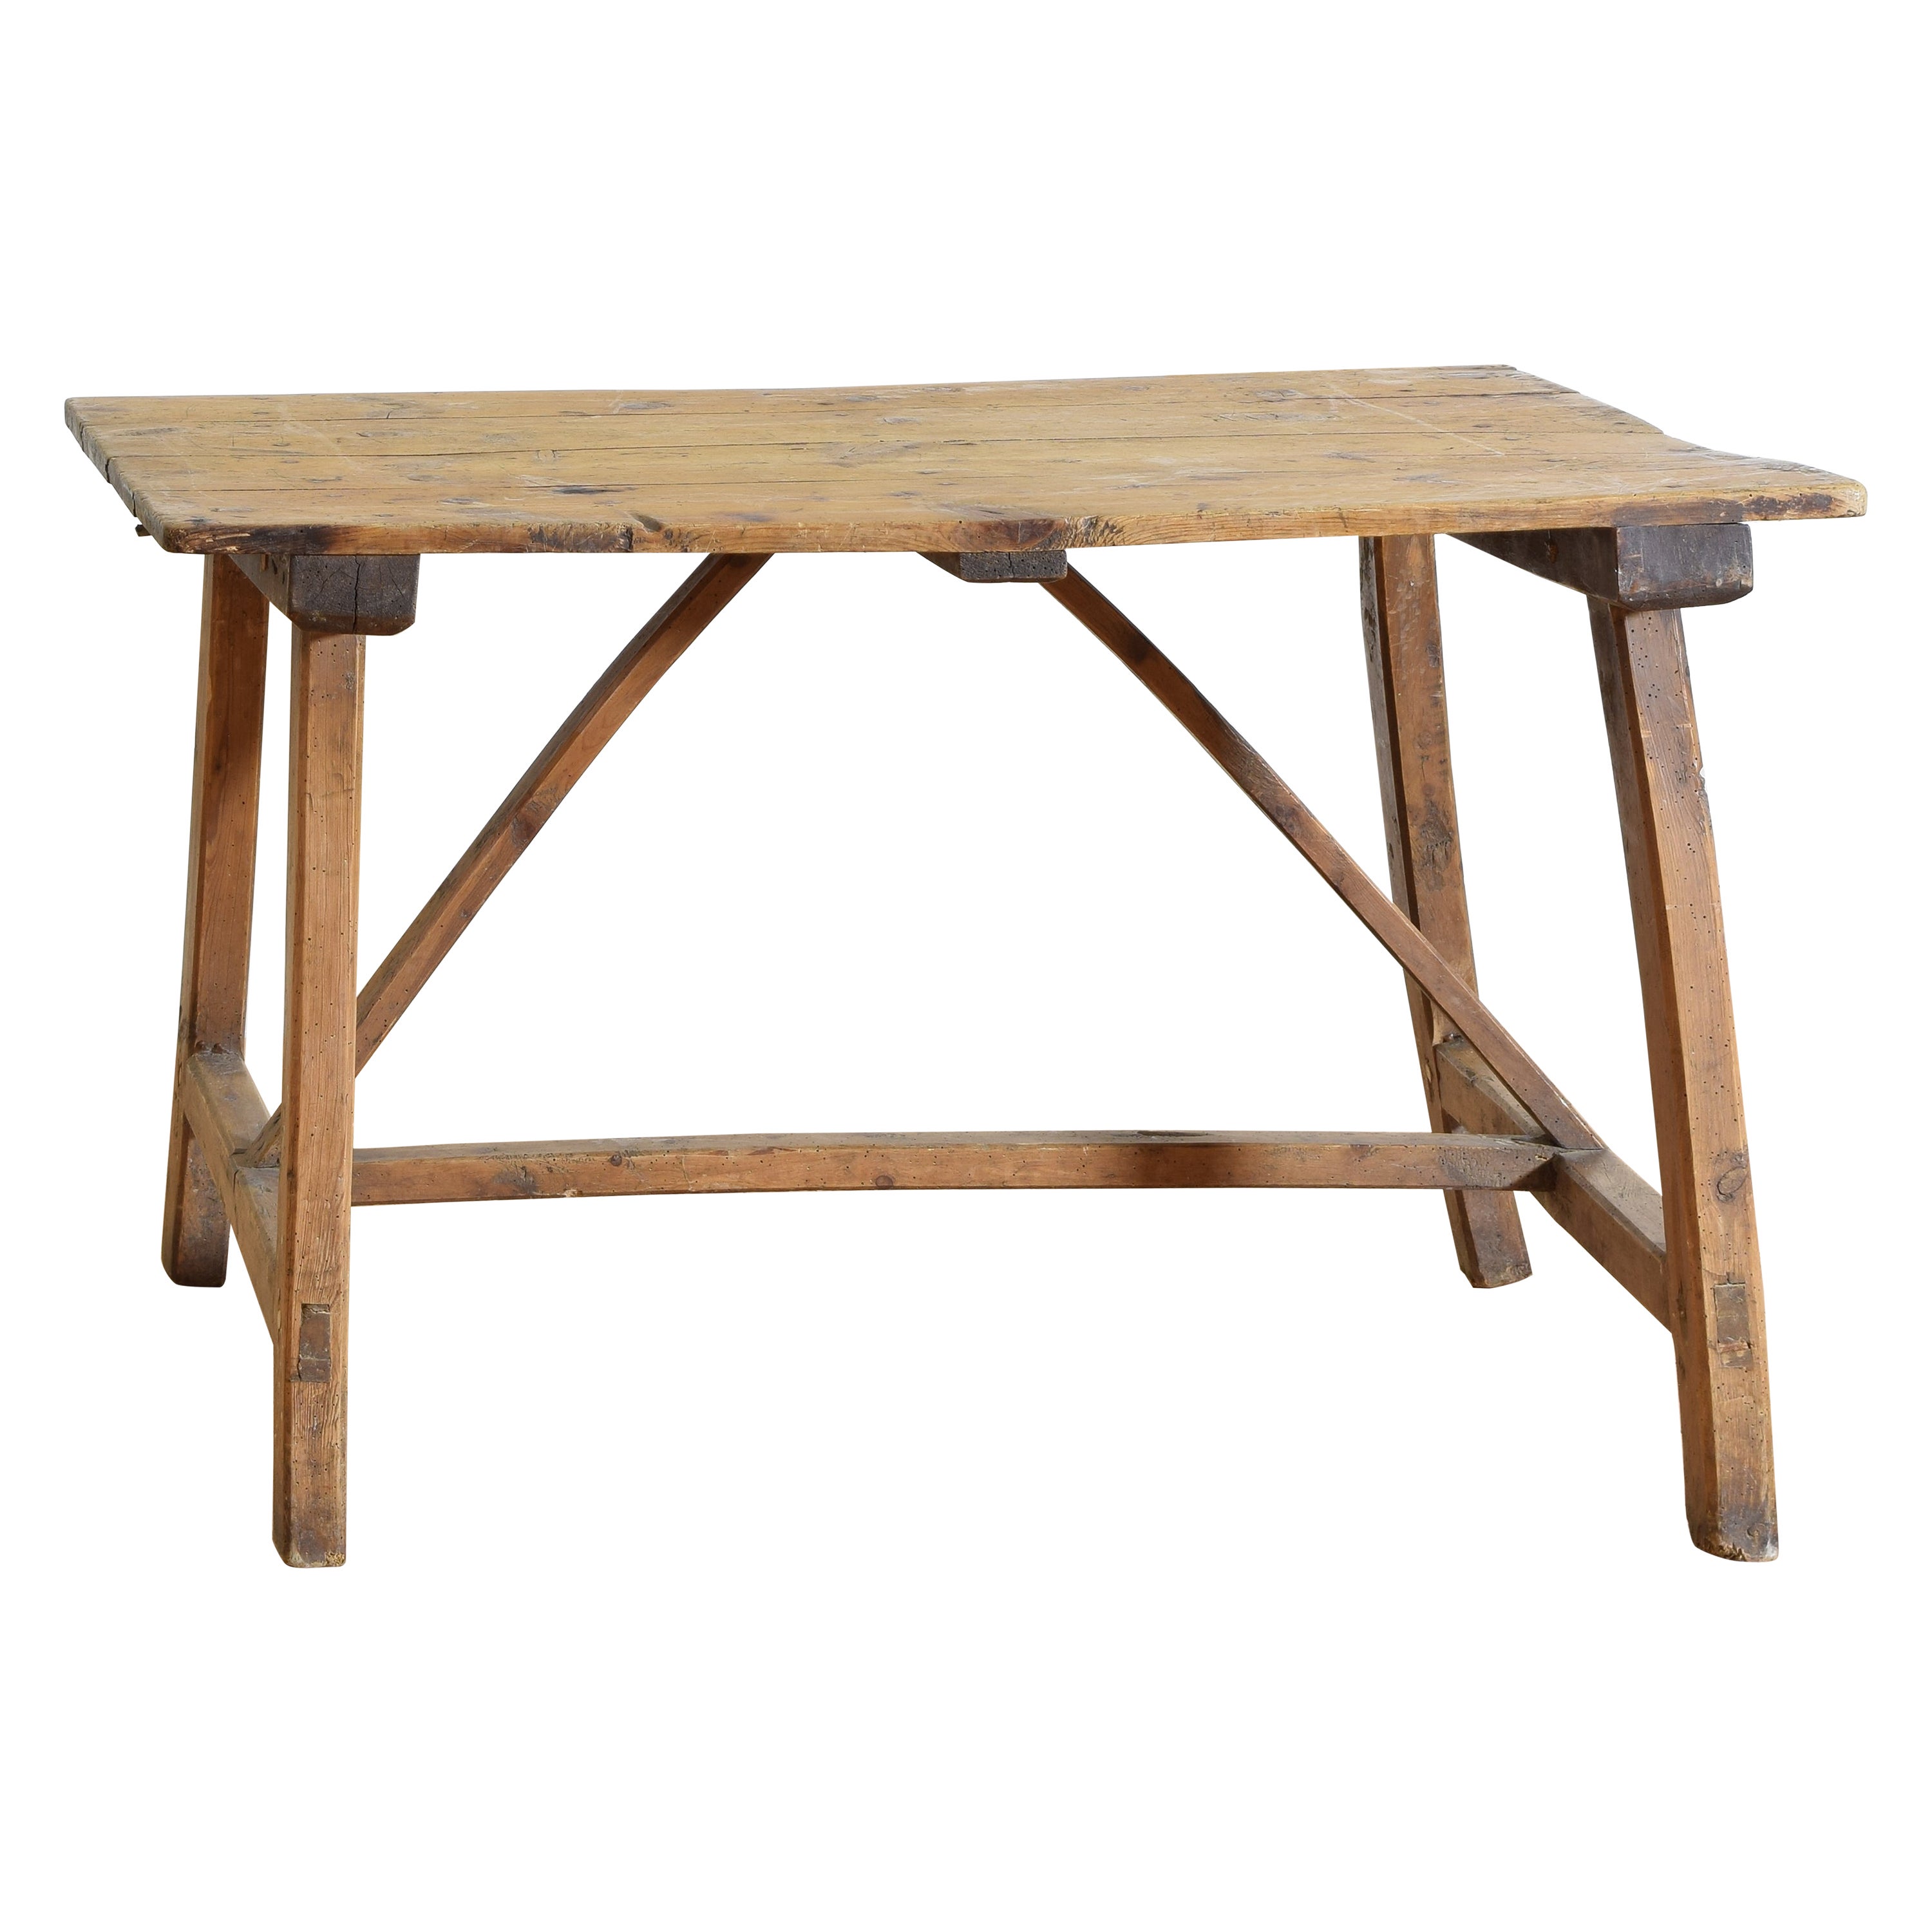 Spanish Rustic Pinewood Trestle Table, early 19th century